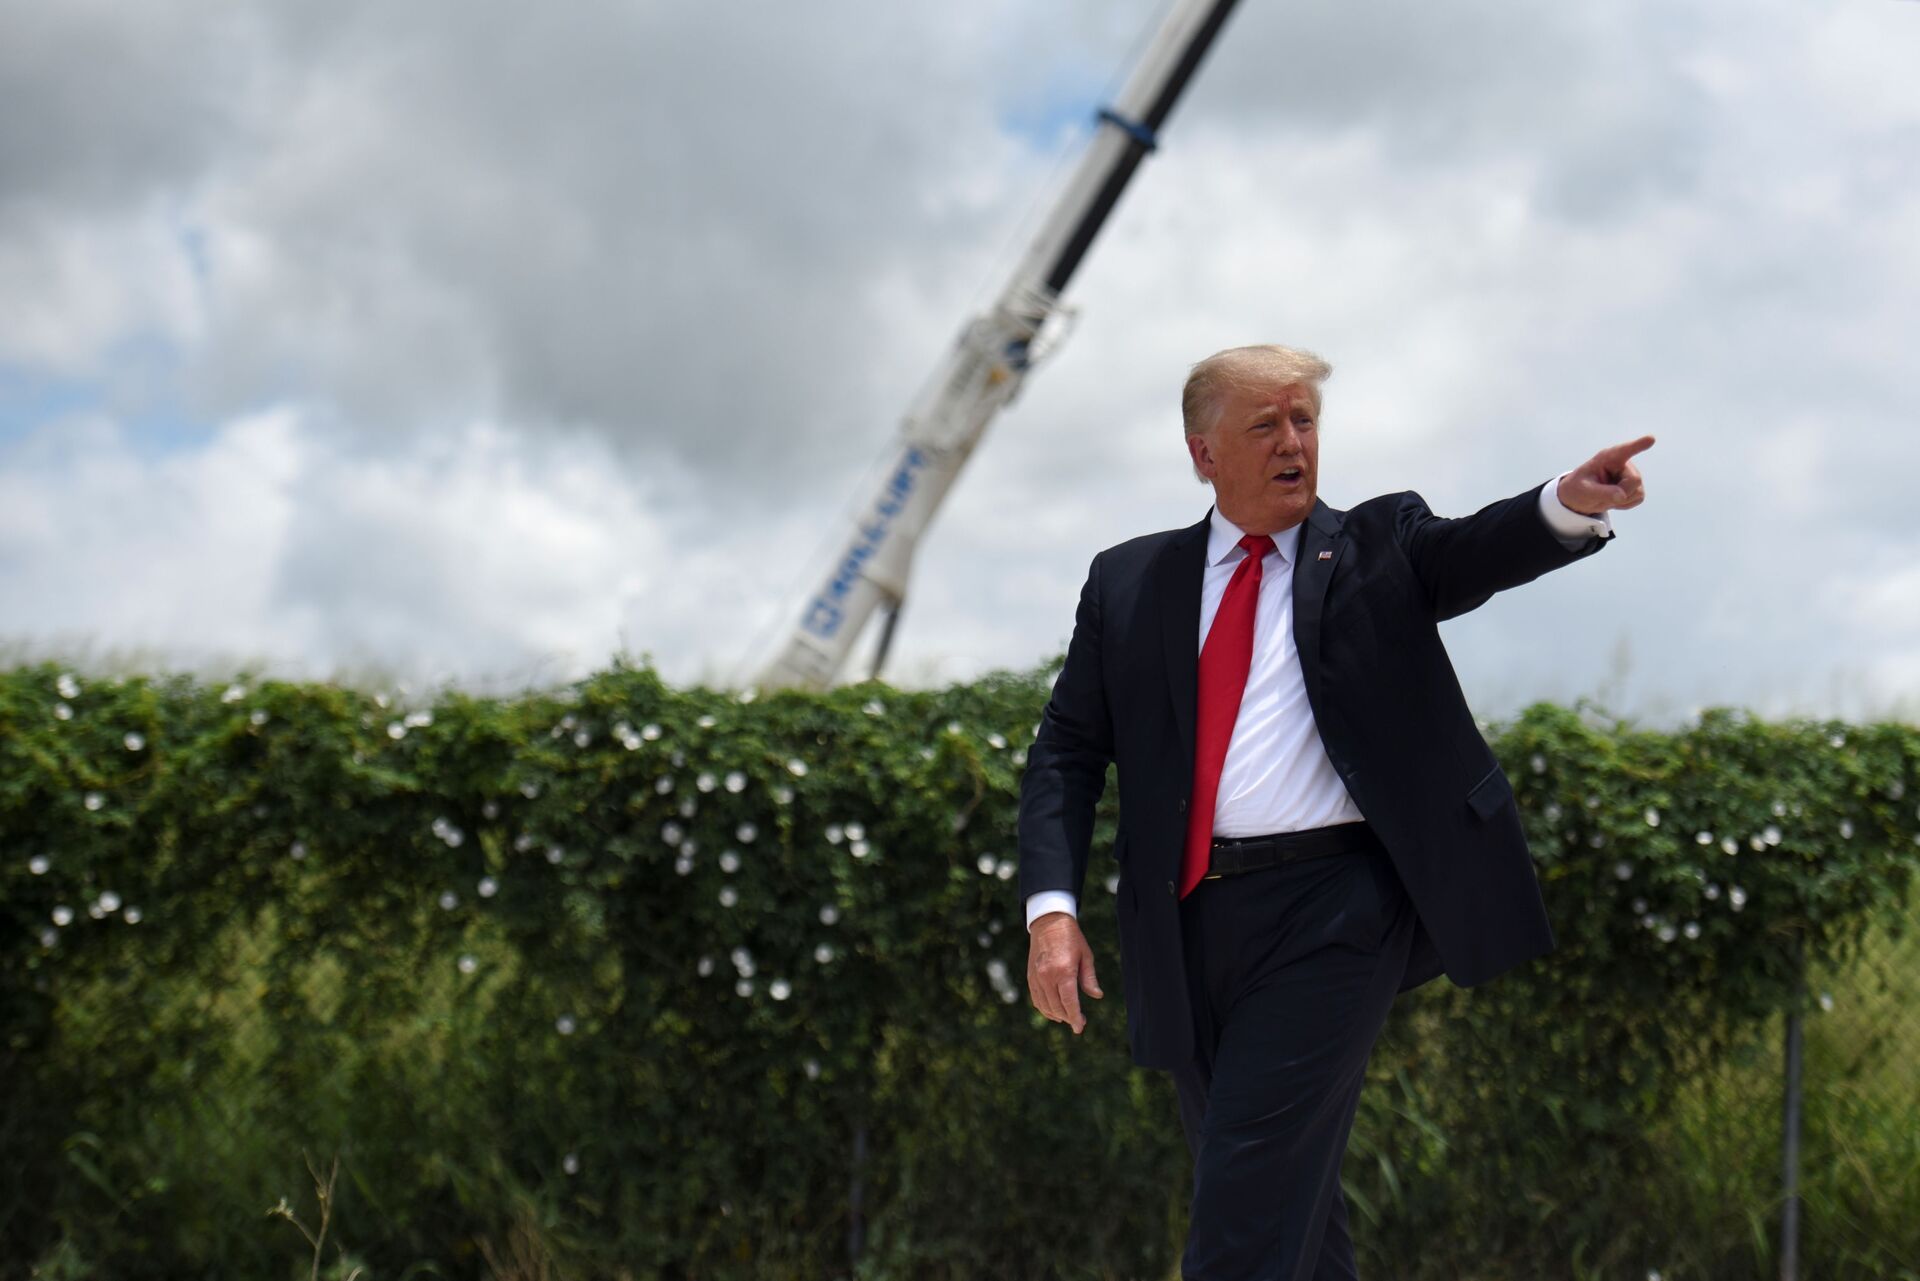 Former U.S. President Donald Trump exits the stage after visiting an unfinished section of the wall along the U.S.-Mexico border with Texas Governor Greg Abbott in Pharr, Texas, U.S. June 30, 2021.  - Sputnik International, 1920, 07.09.2021